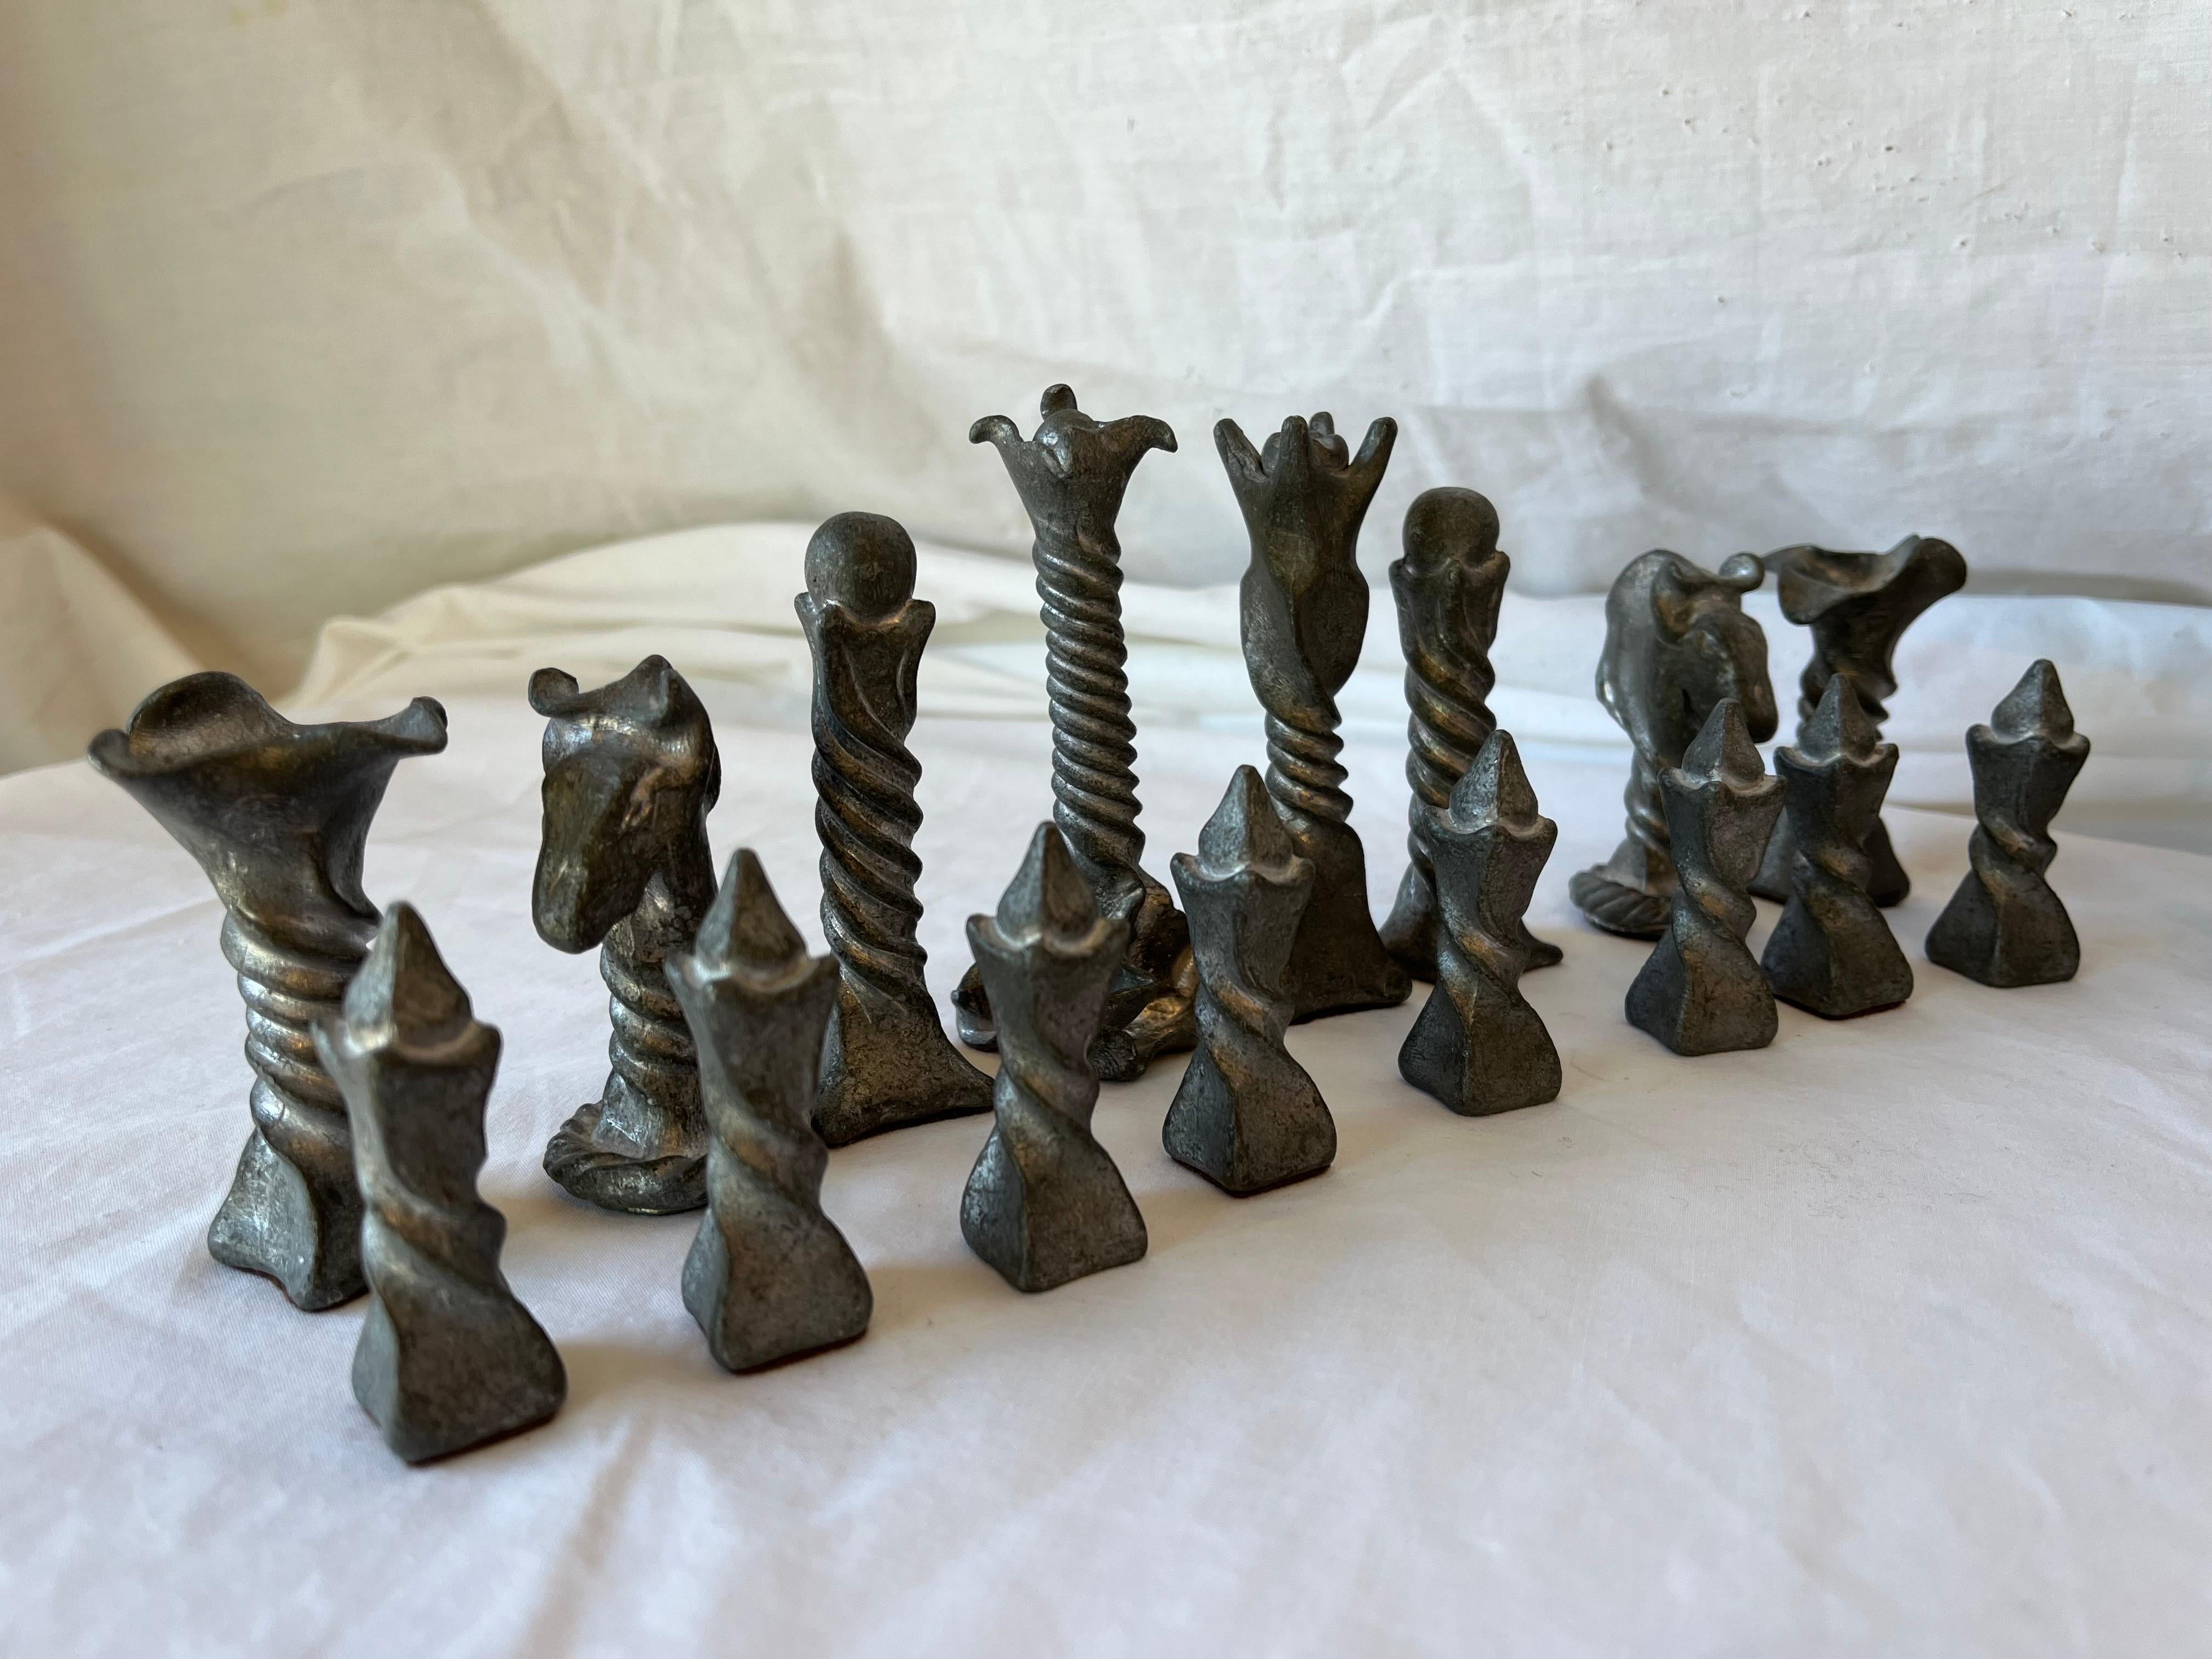 Vintage Brutalist Style Cast Metal Chess Set with Twisted and Flanged Design 12